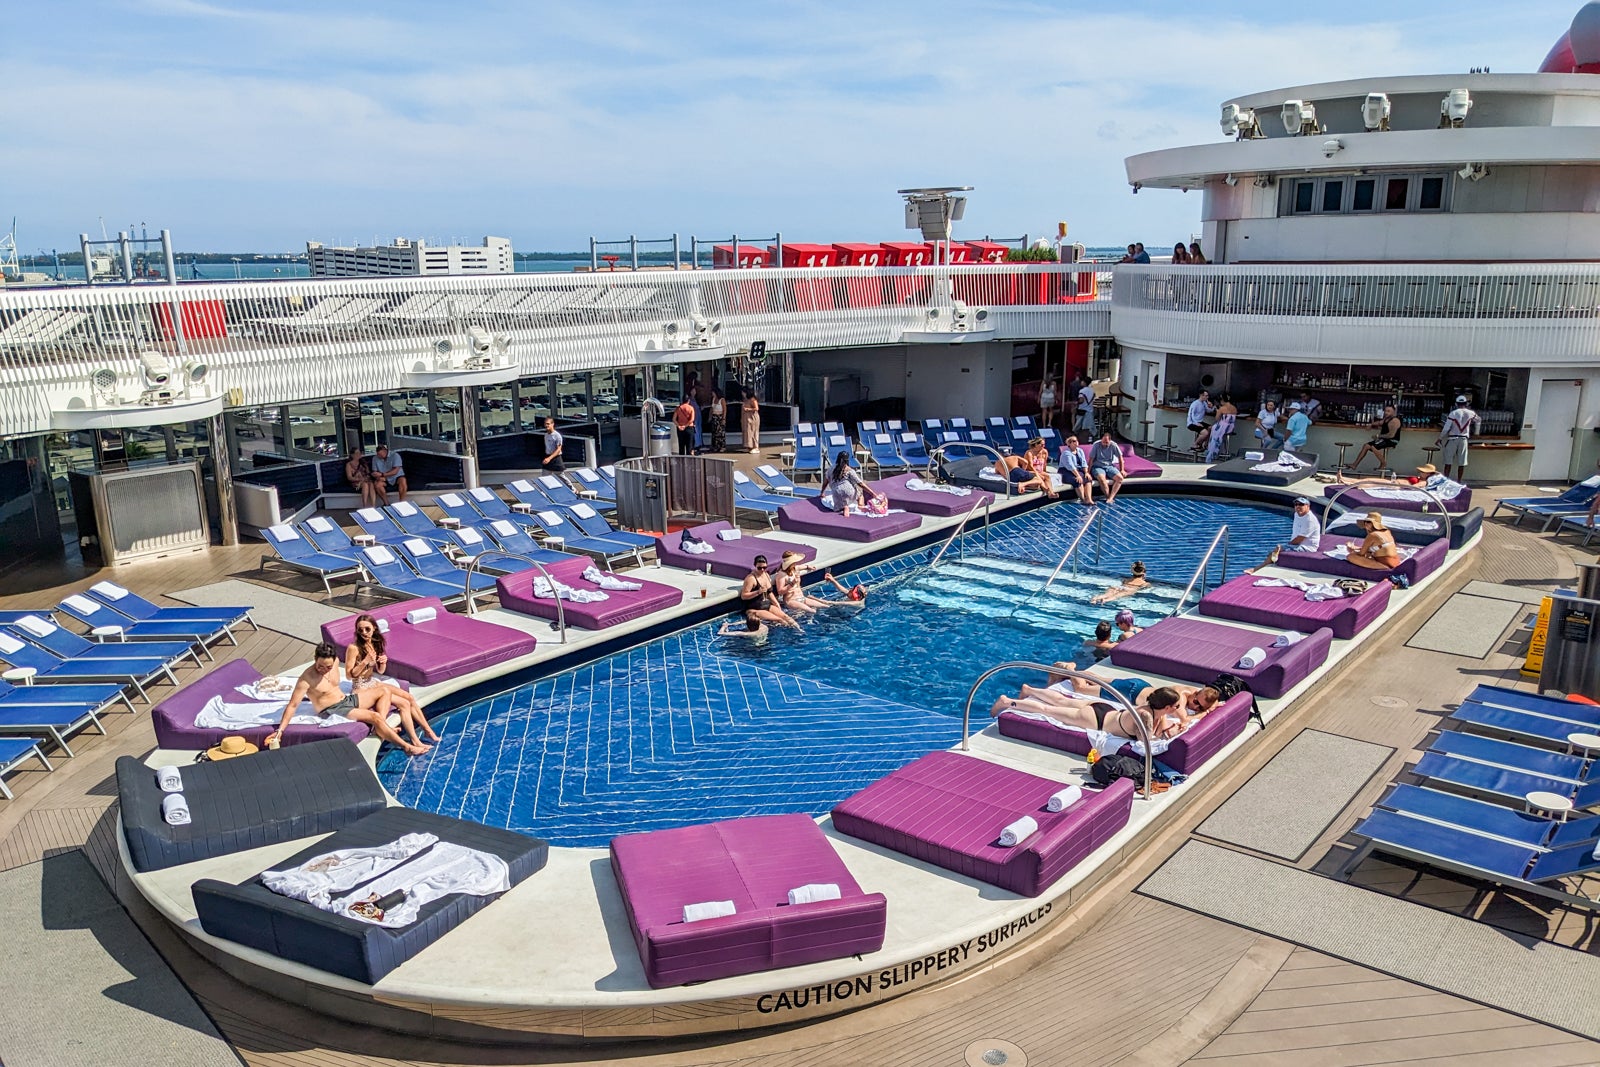 You are currently viewing Scarlet Lady cruise ship review: What to expect on board Virgin Voyages’ 1st ship